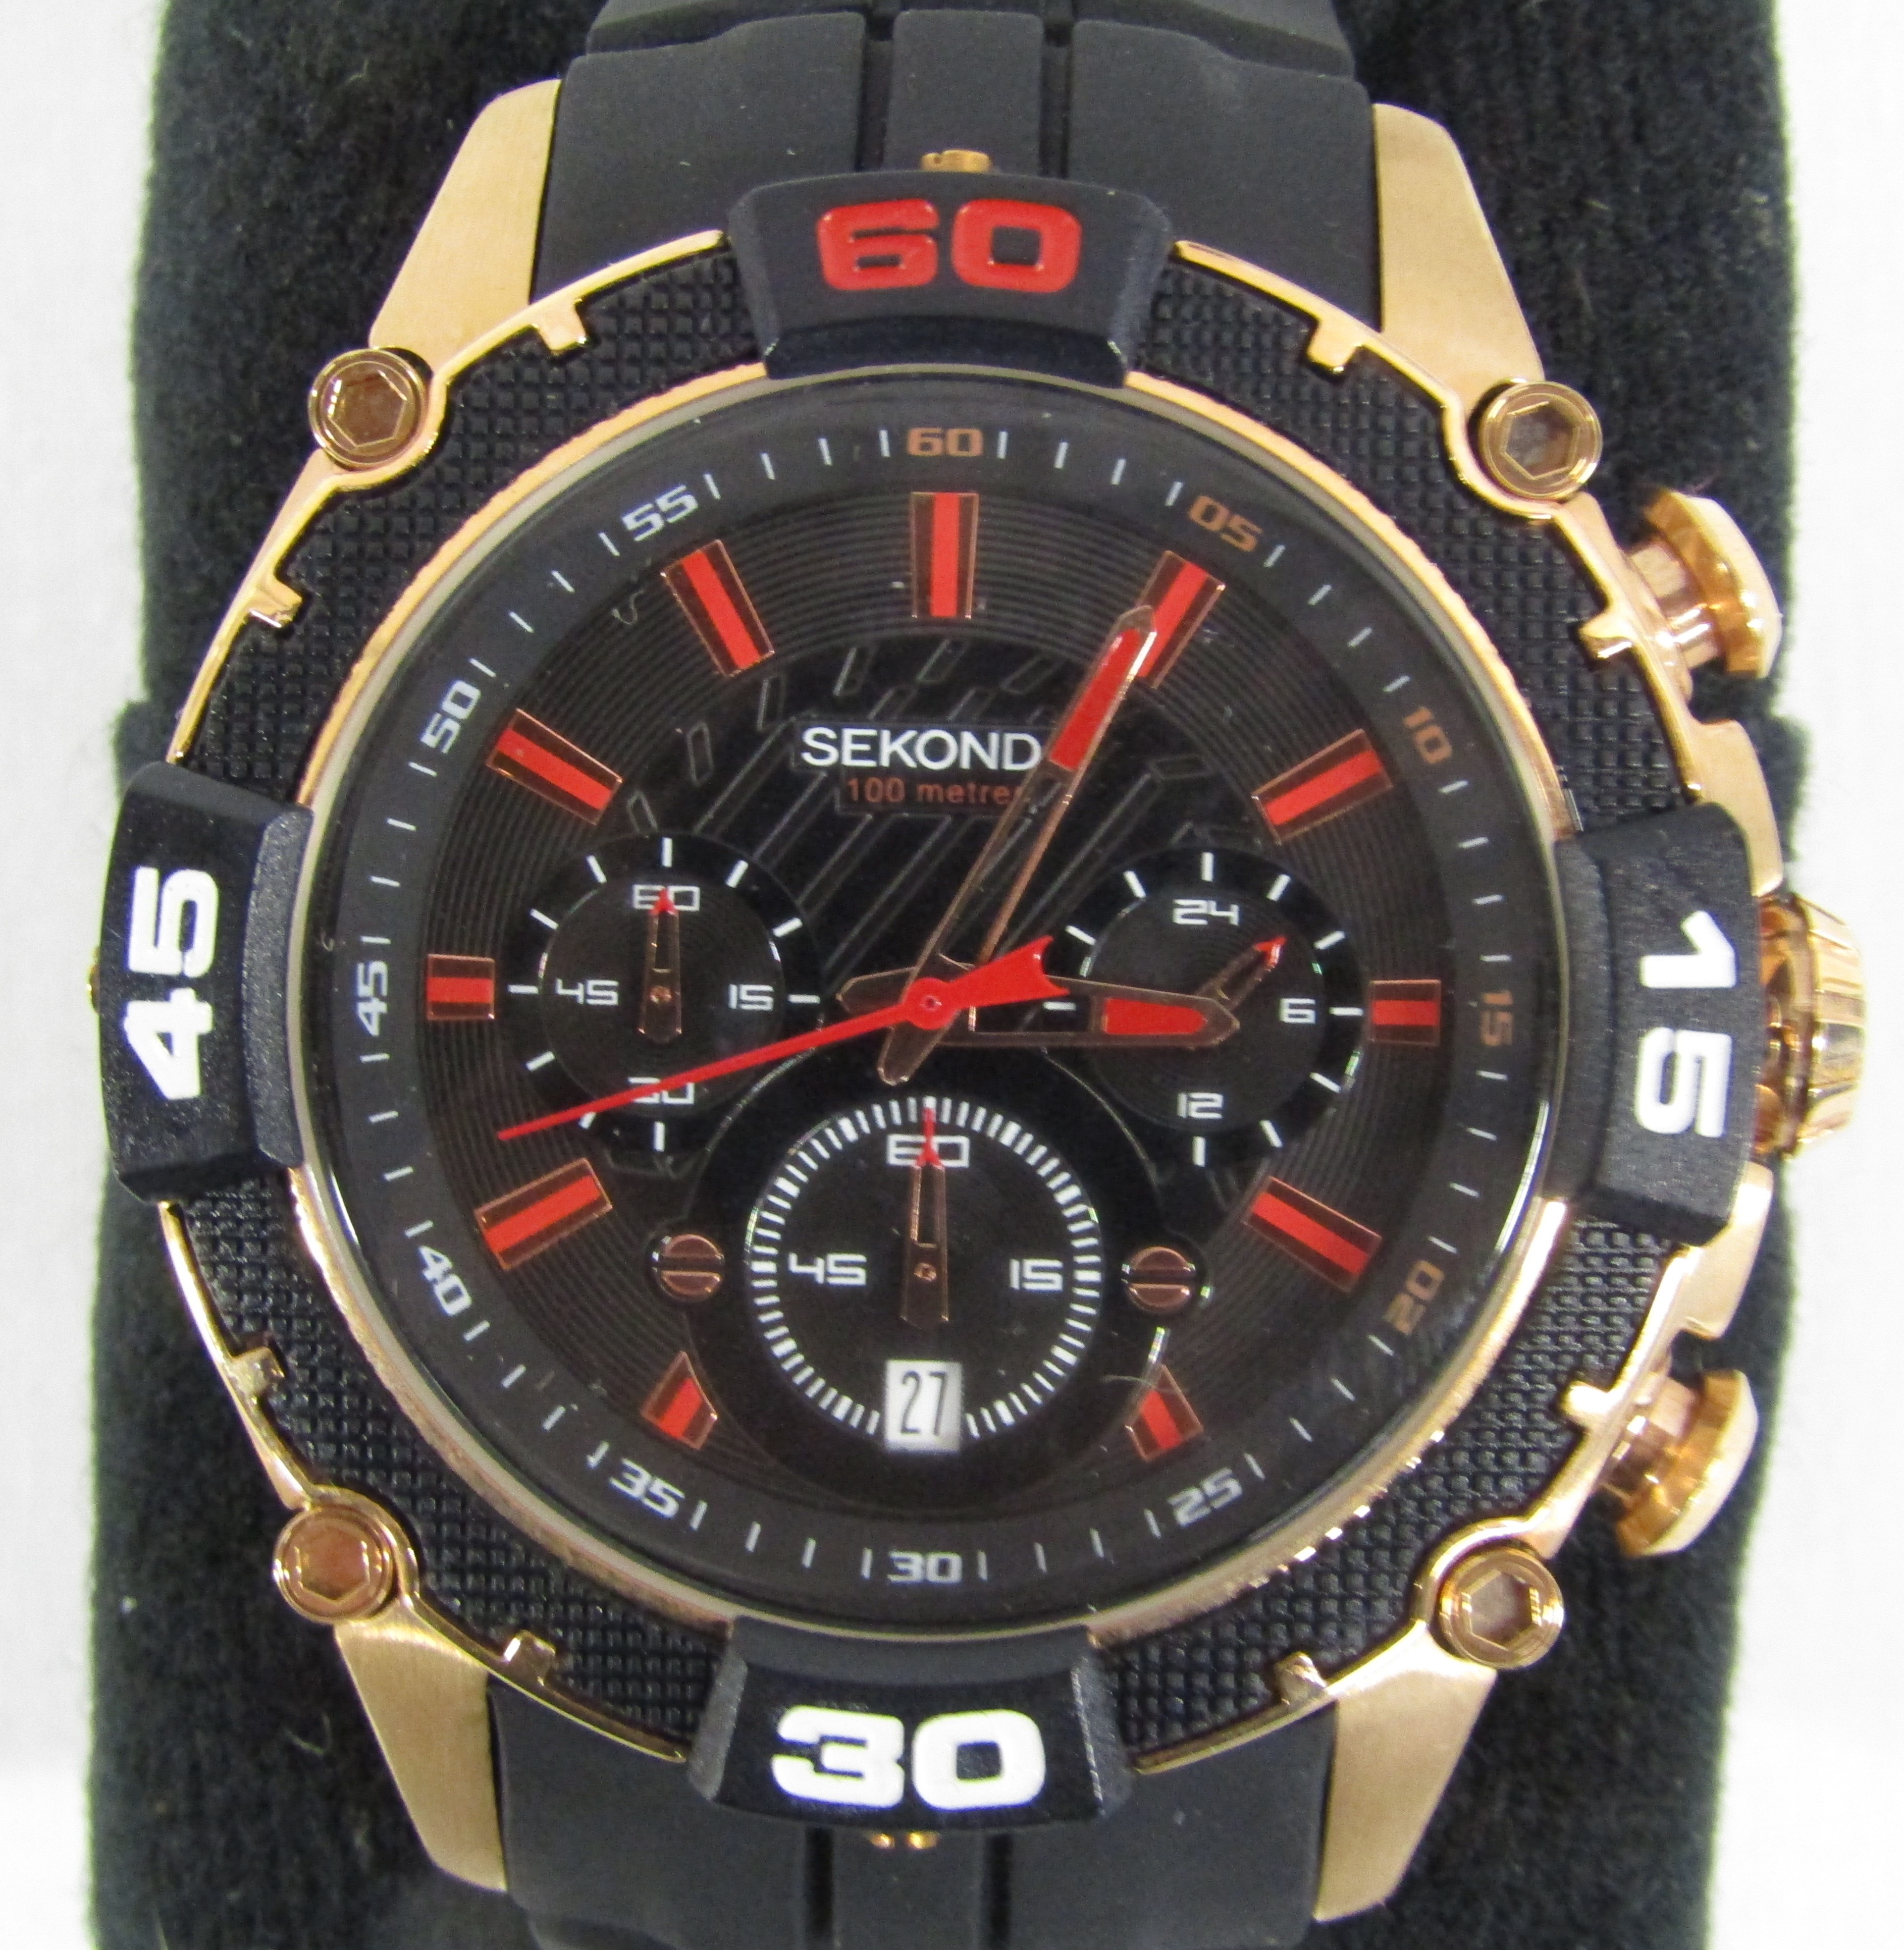 6 men's Sekonda watches - 1525 digital, 03405 with date, 3846 with date, 3407H chronograph, N3490 - Image 10 of 13